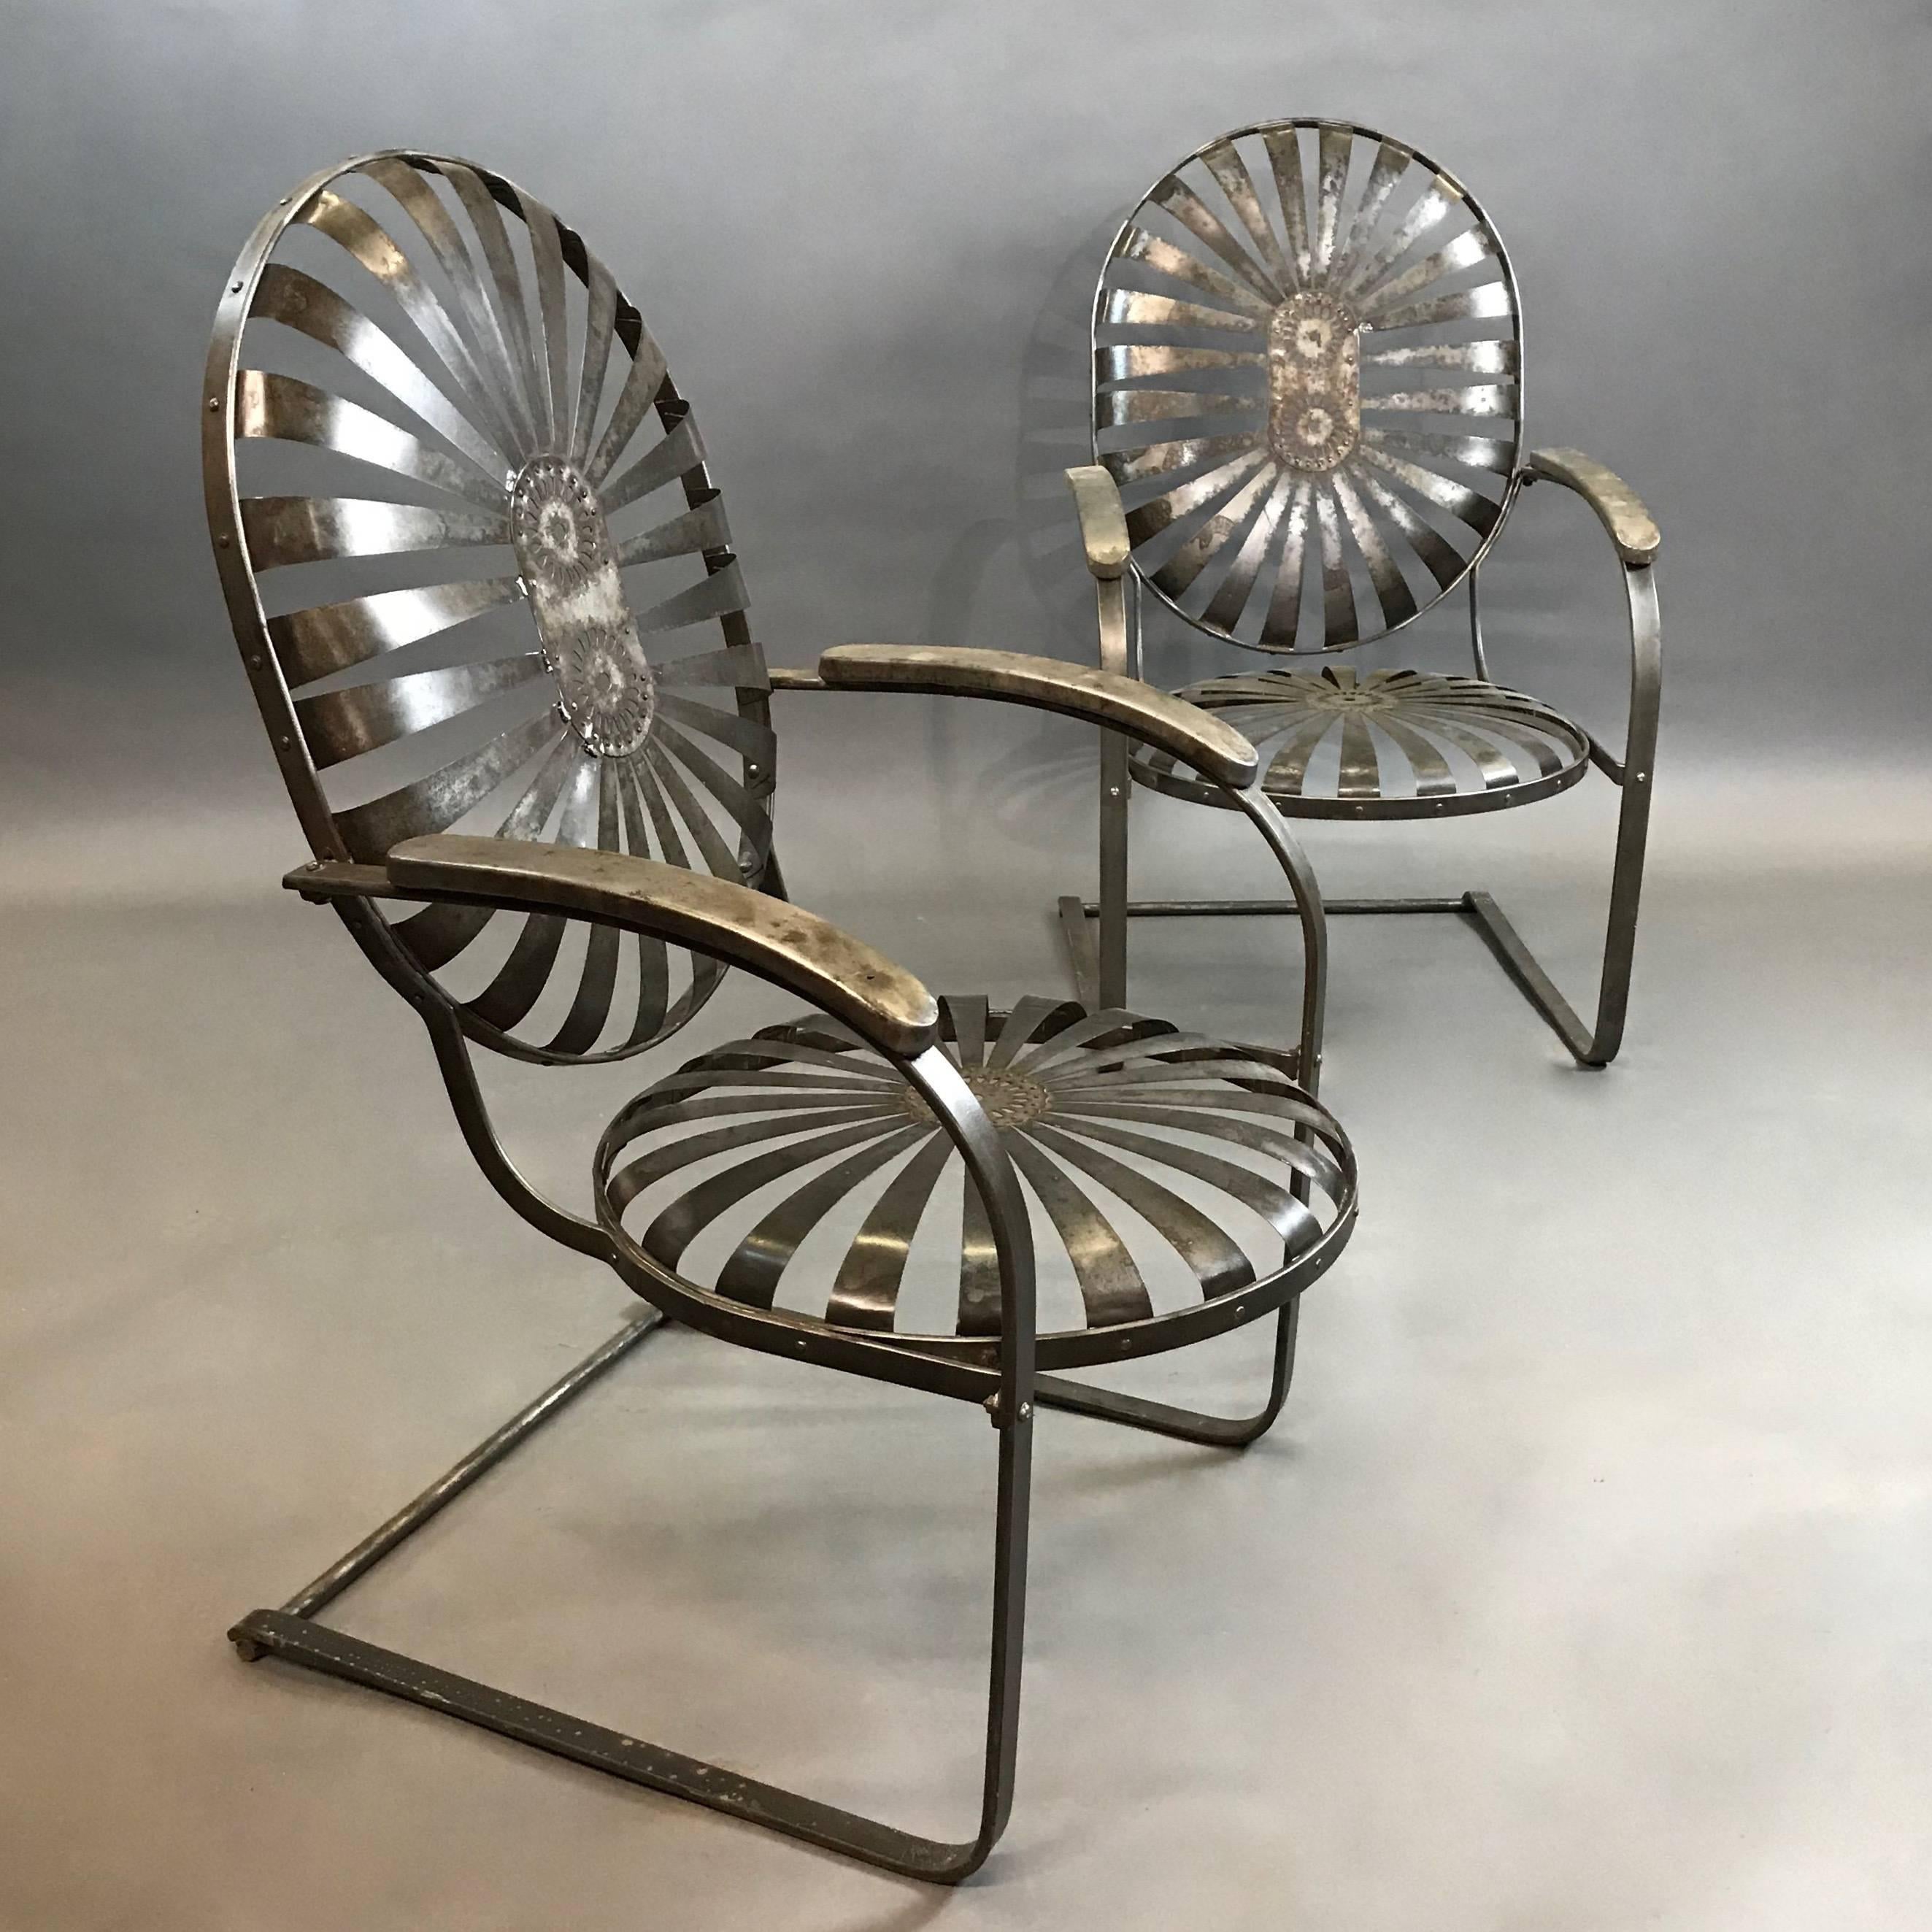 Pair of French, high back, sunburst, Francois Carré armchairs with cantilever bases in a brushed steel finish. Arm height is 27 inches.